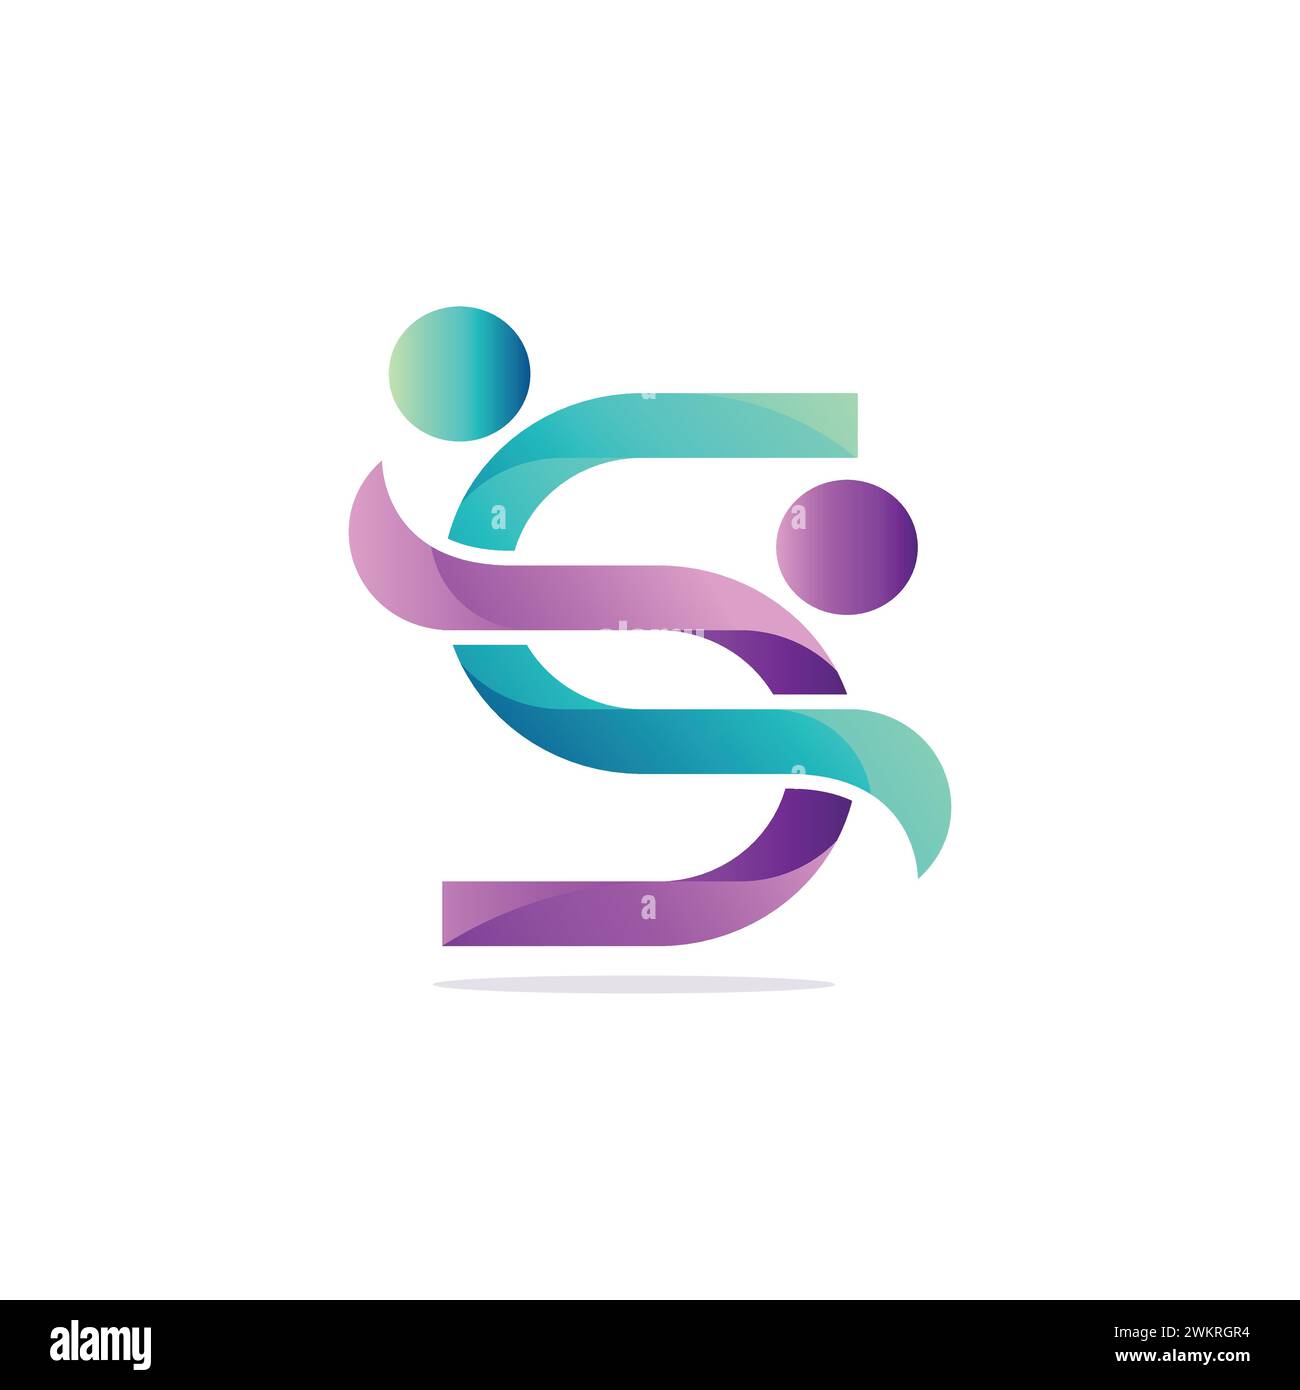 Abstract letter S design logo. Abstract colorful people figure of the letter S logo intersecting each other Stock Vector